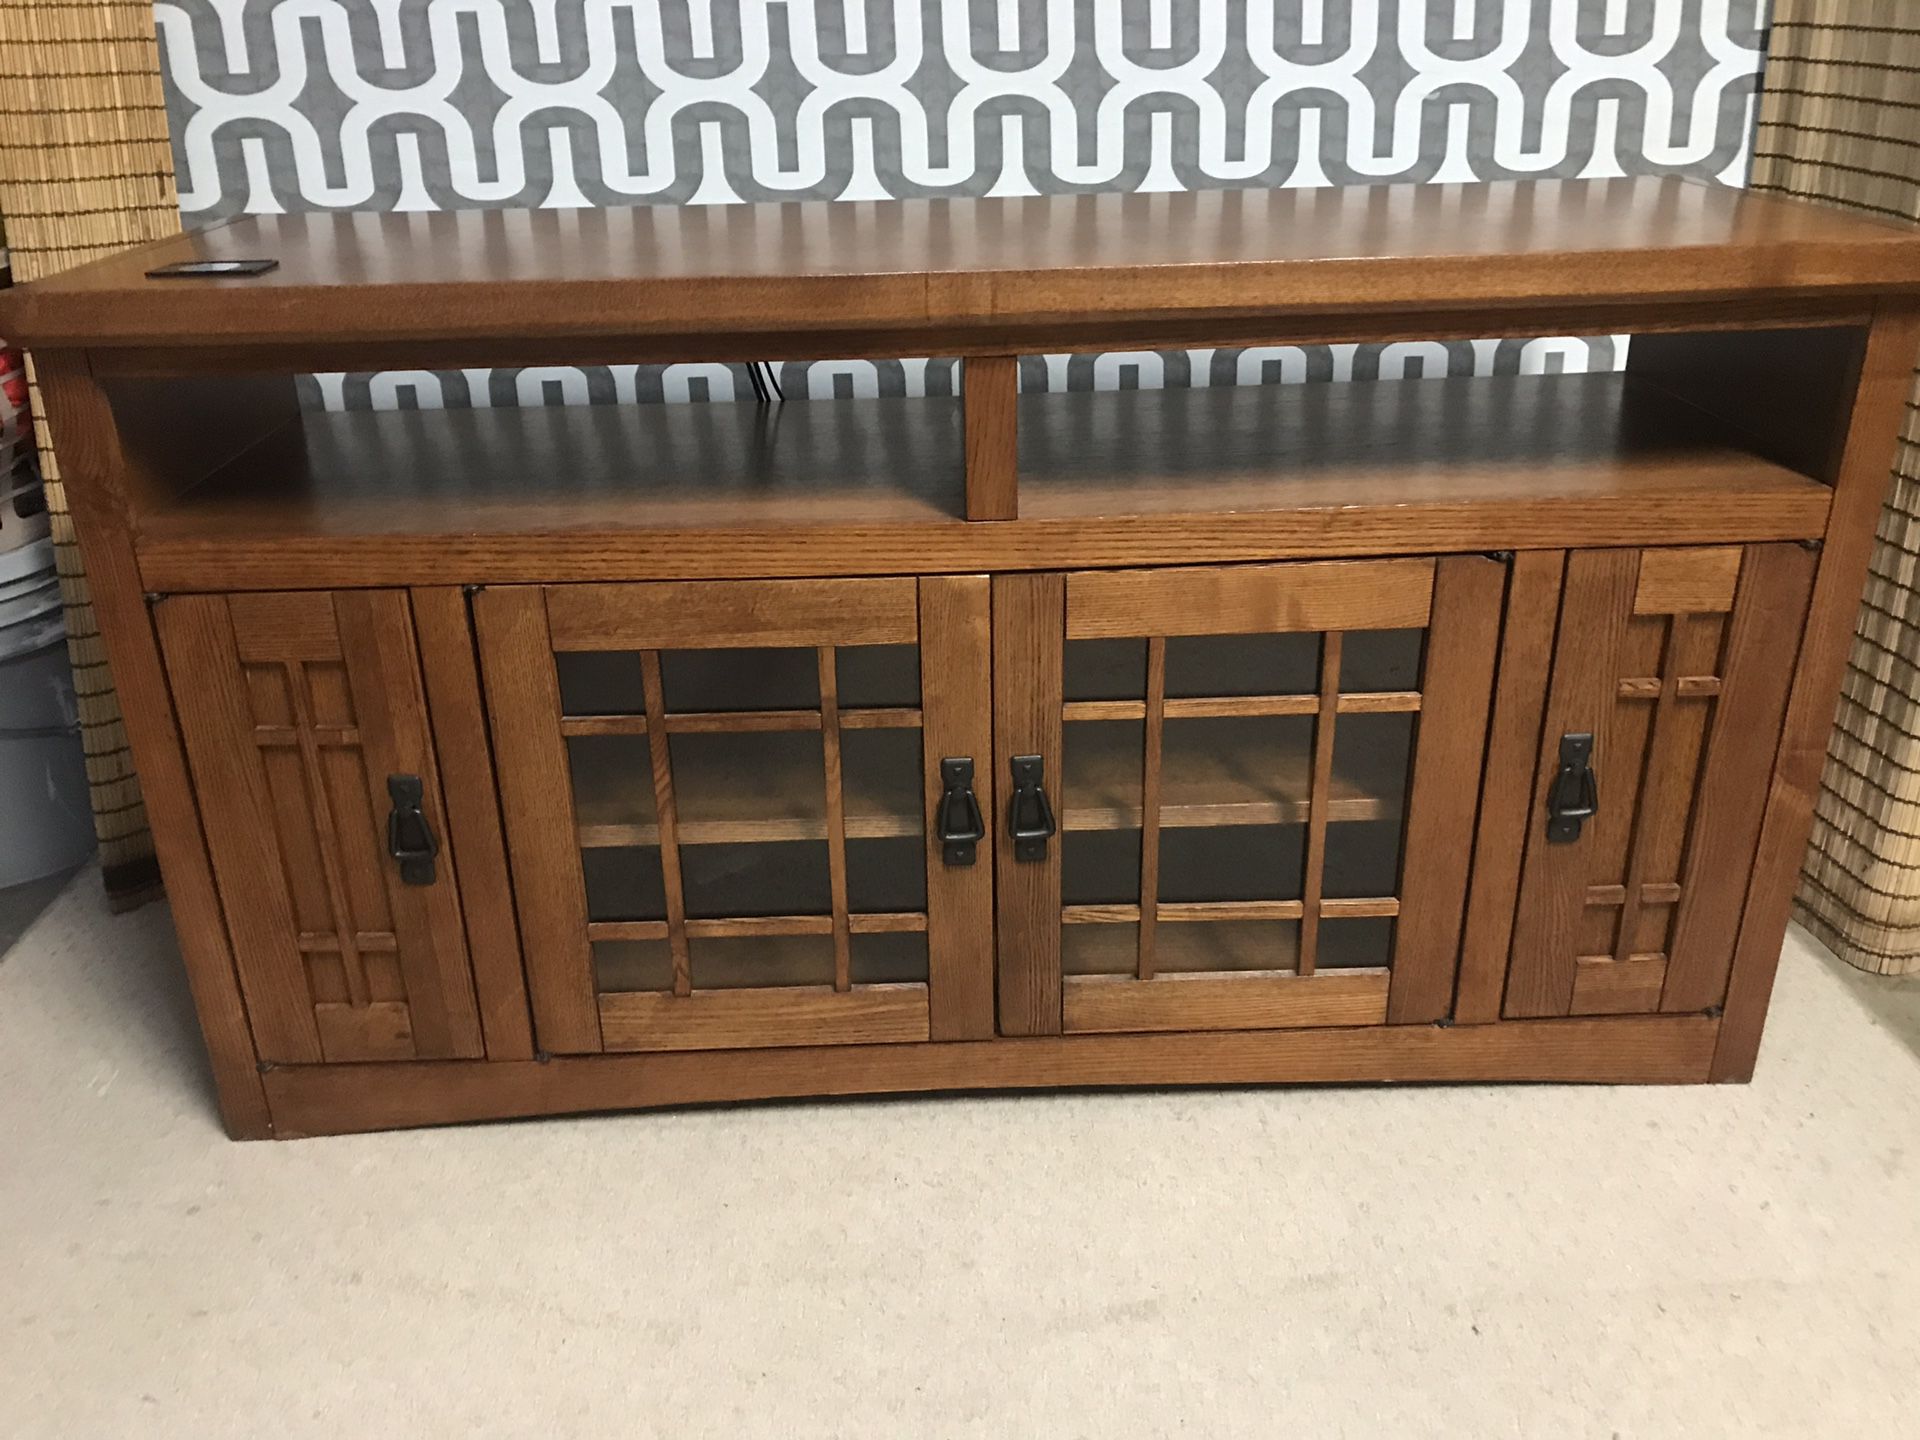 Tv console with two cabinets and one shelf heavy wood sturdy no damage 52”x28”x14”